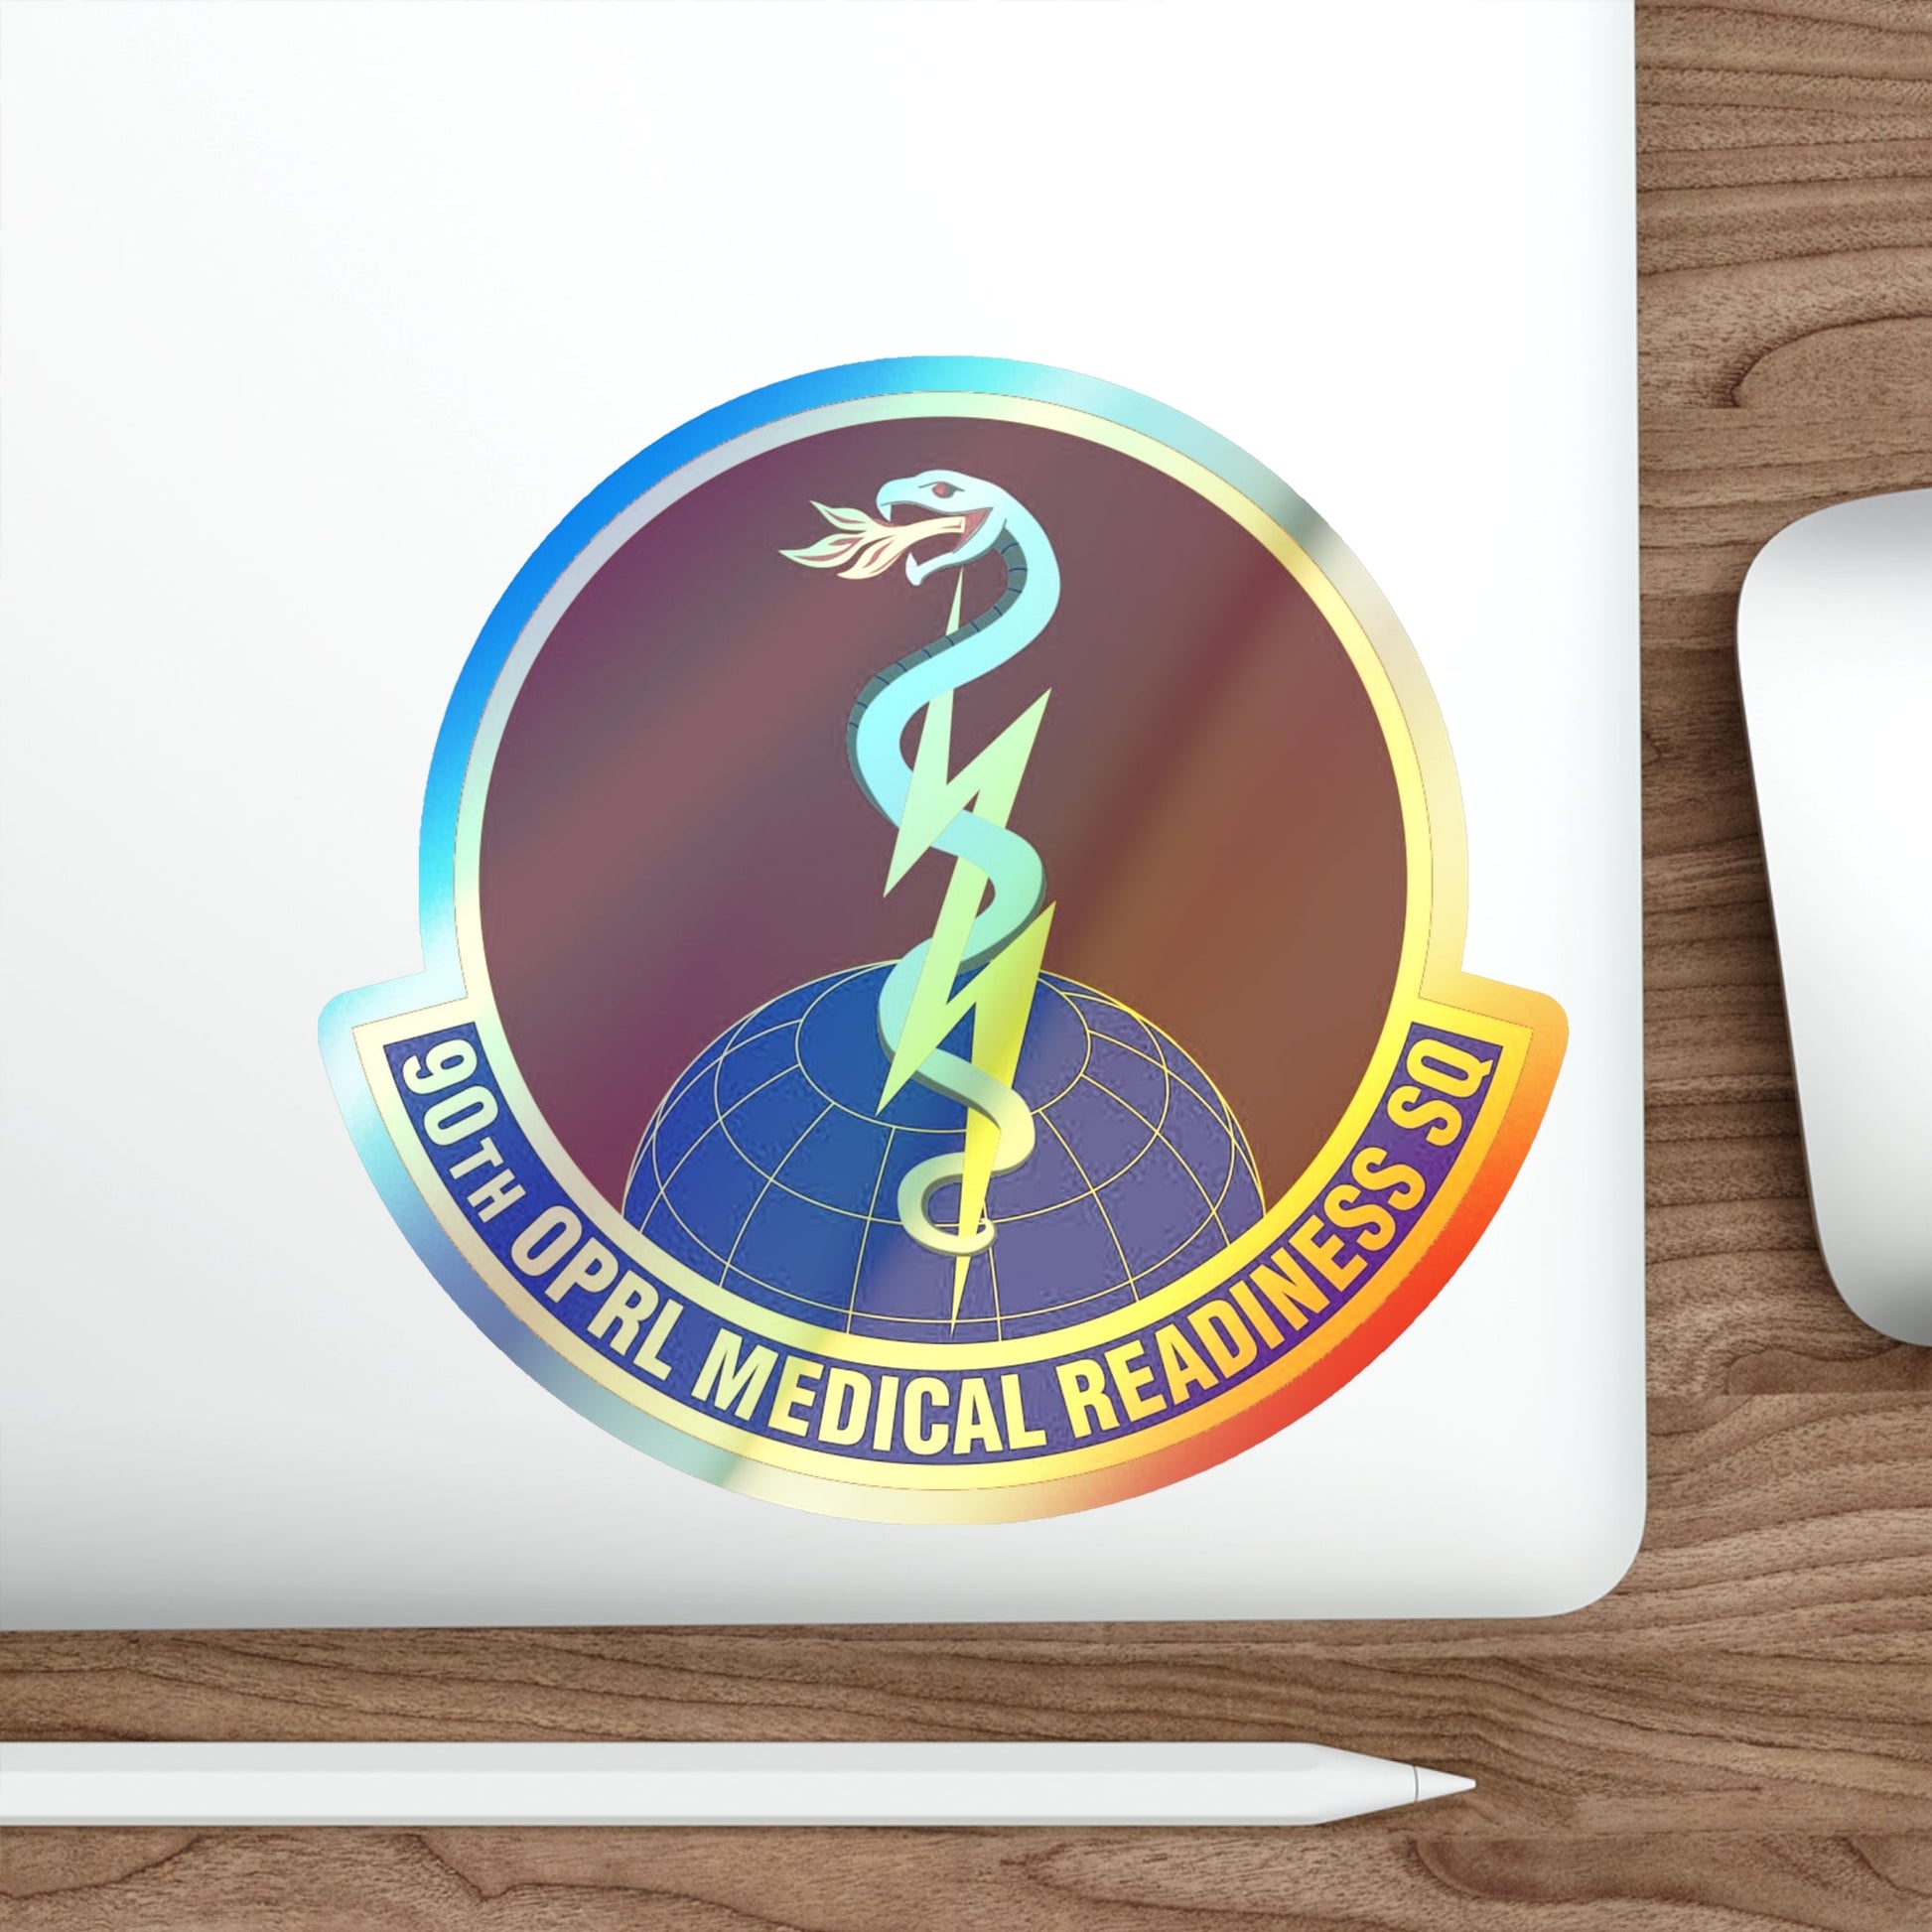 90 Operational Medical Readiness Squadron AFGSC (U.S. Air Force) Holographic STICKER Die-Cut Vinyl Decal-The Sticker Space